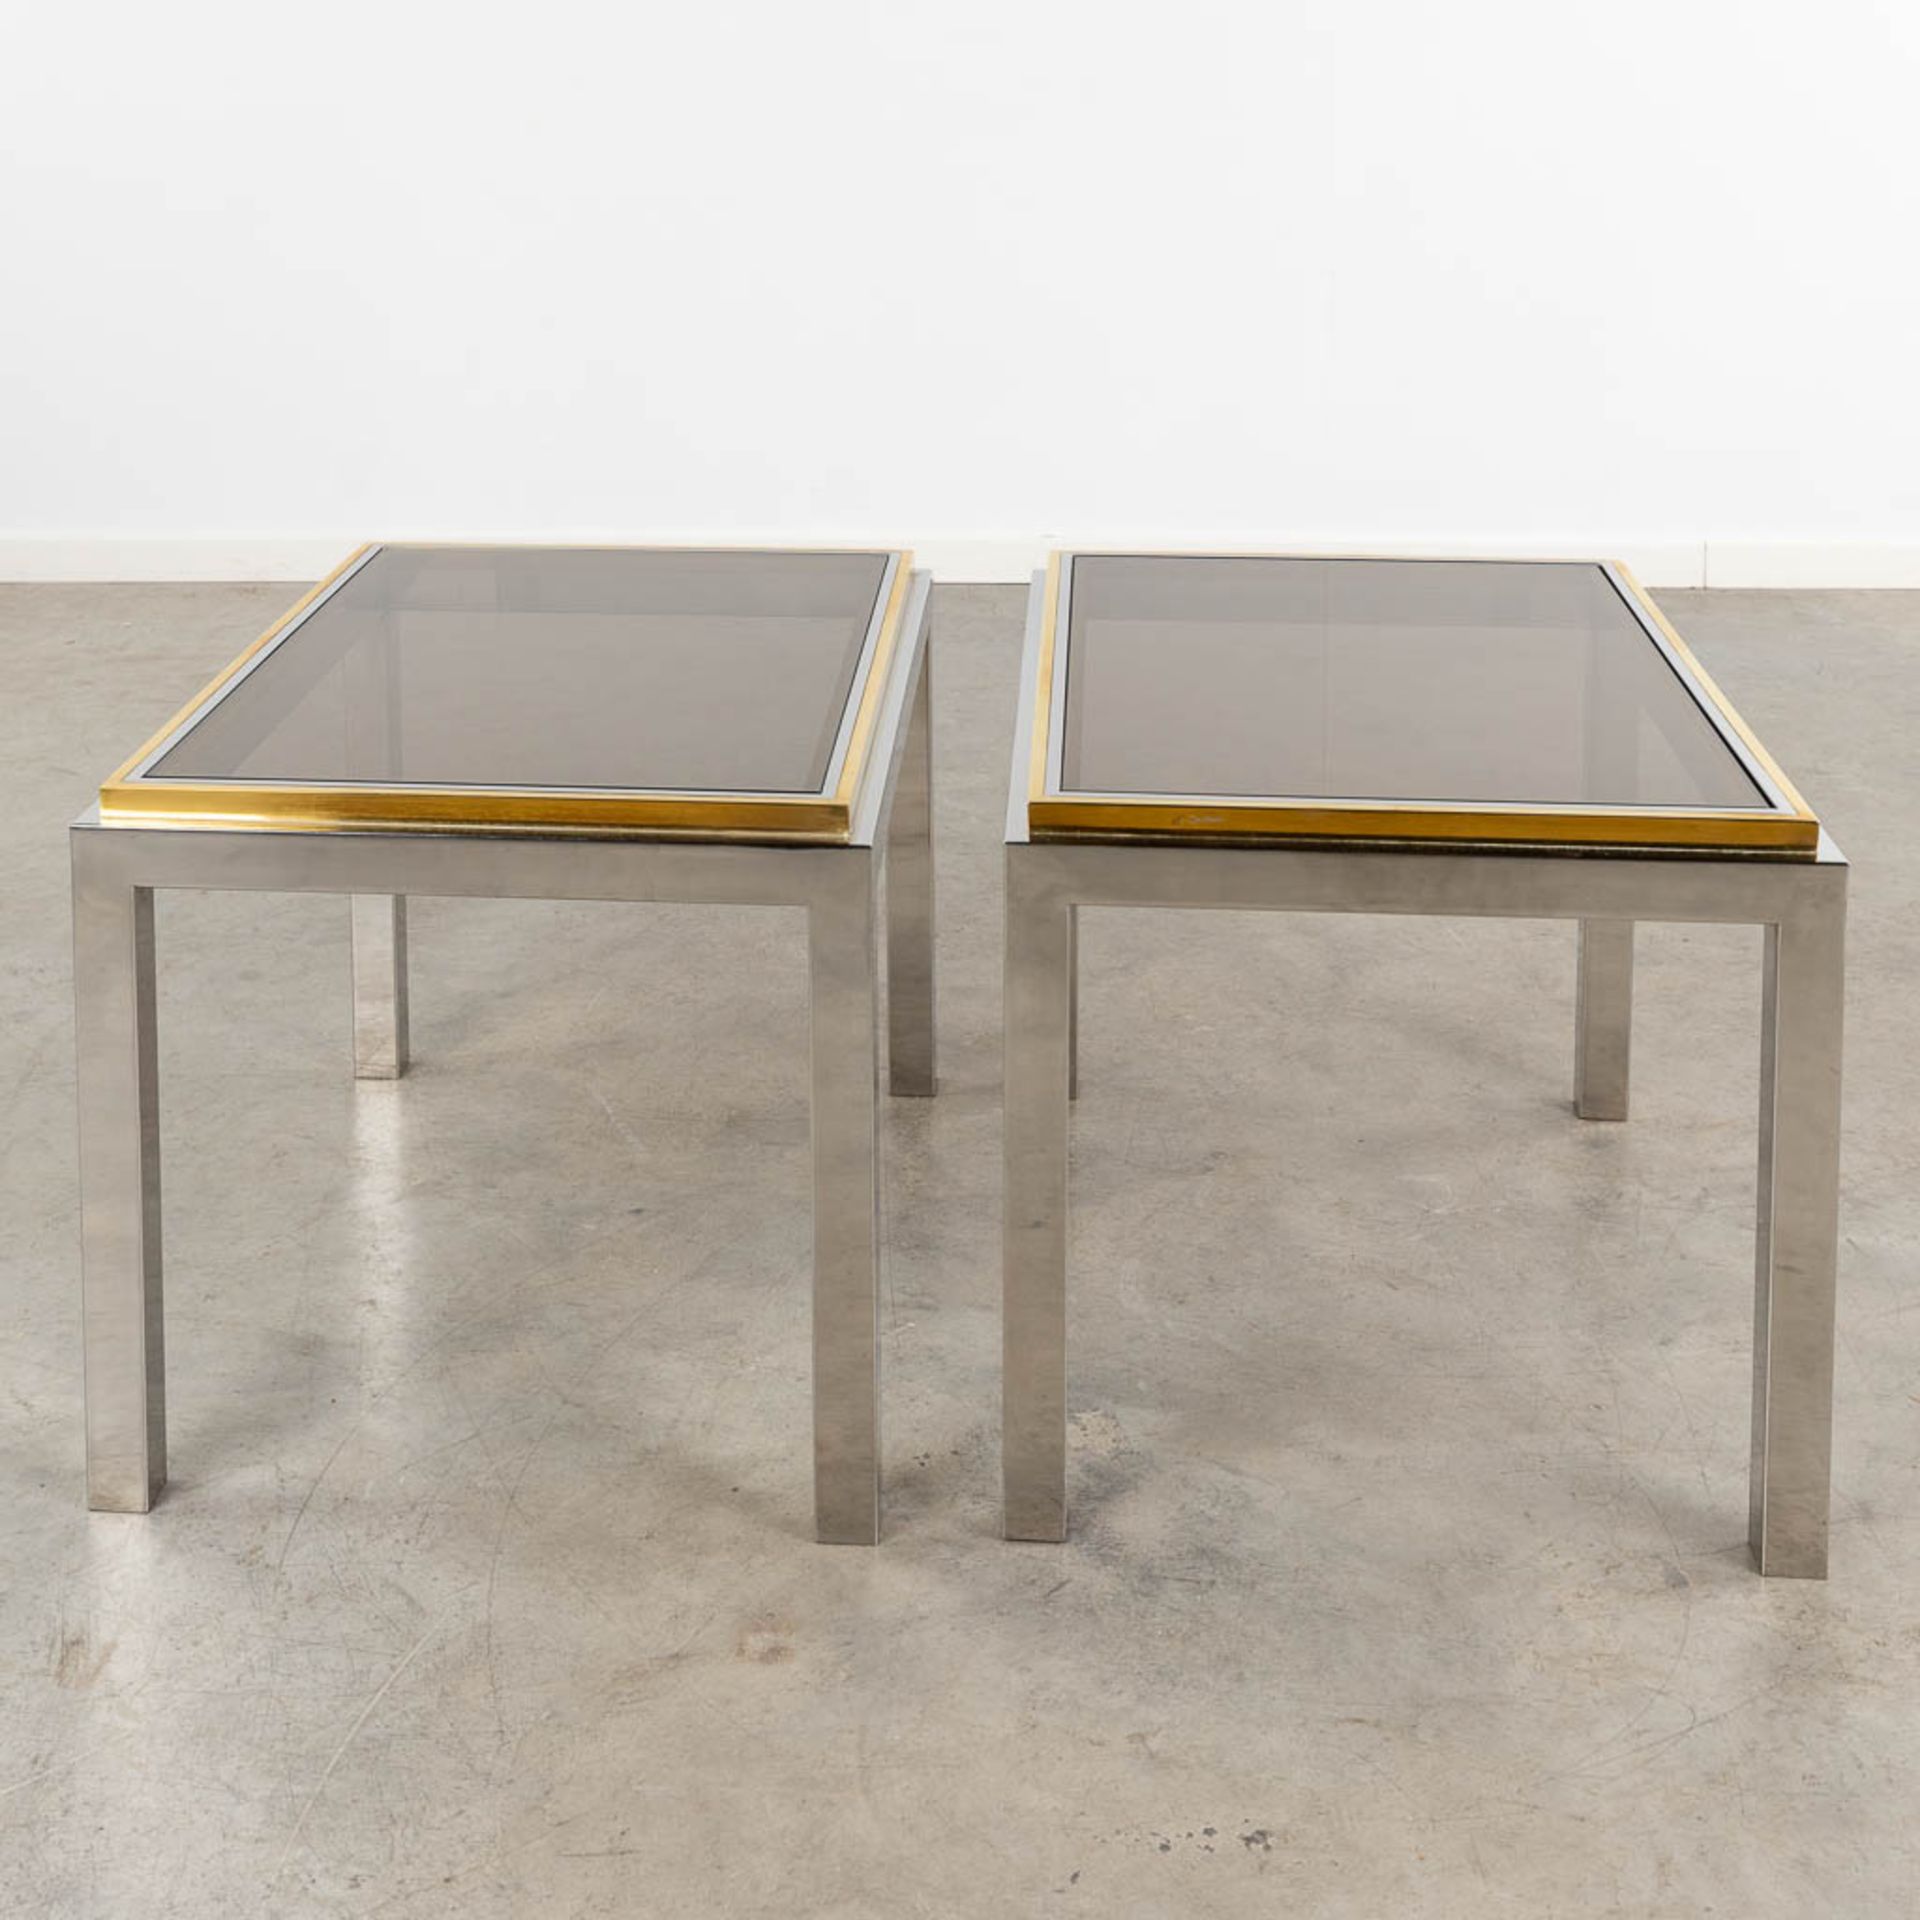 Jean CHARLES (XX-XXI) for Maison Charles, a pair of side tables with a fumé glass top. (L:50 x W:70 - Image 6 of 10